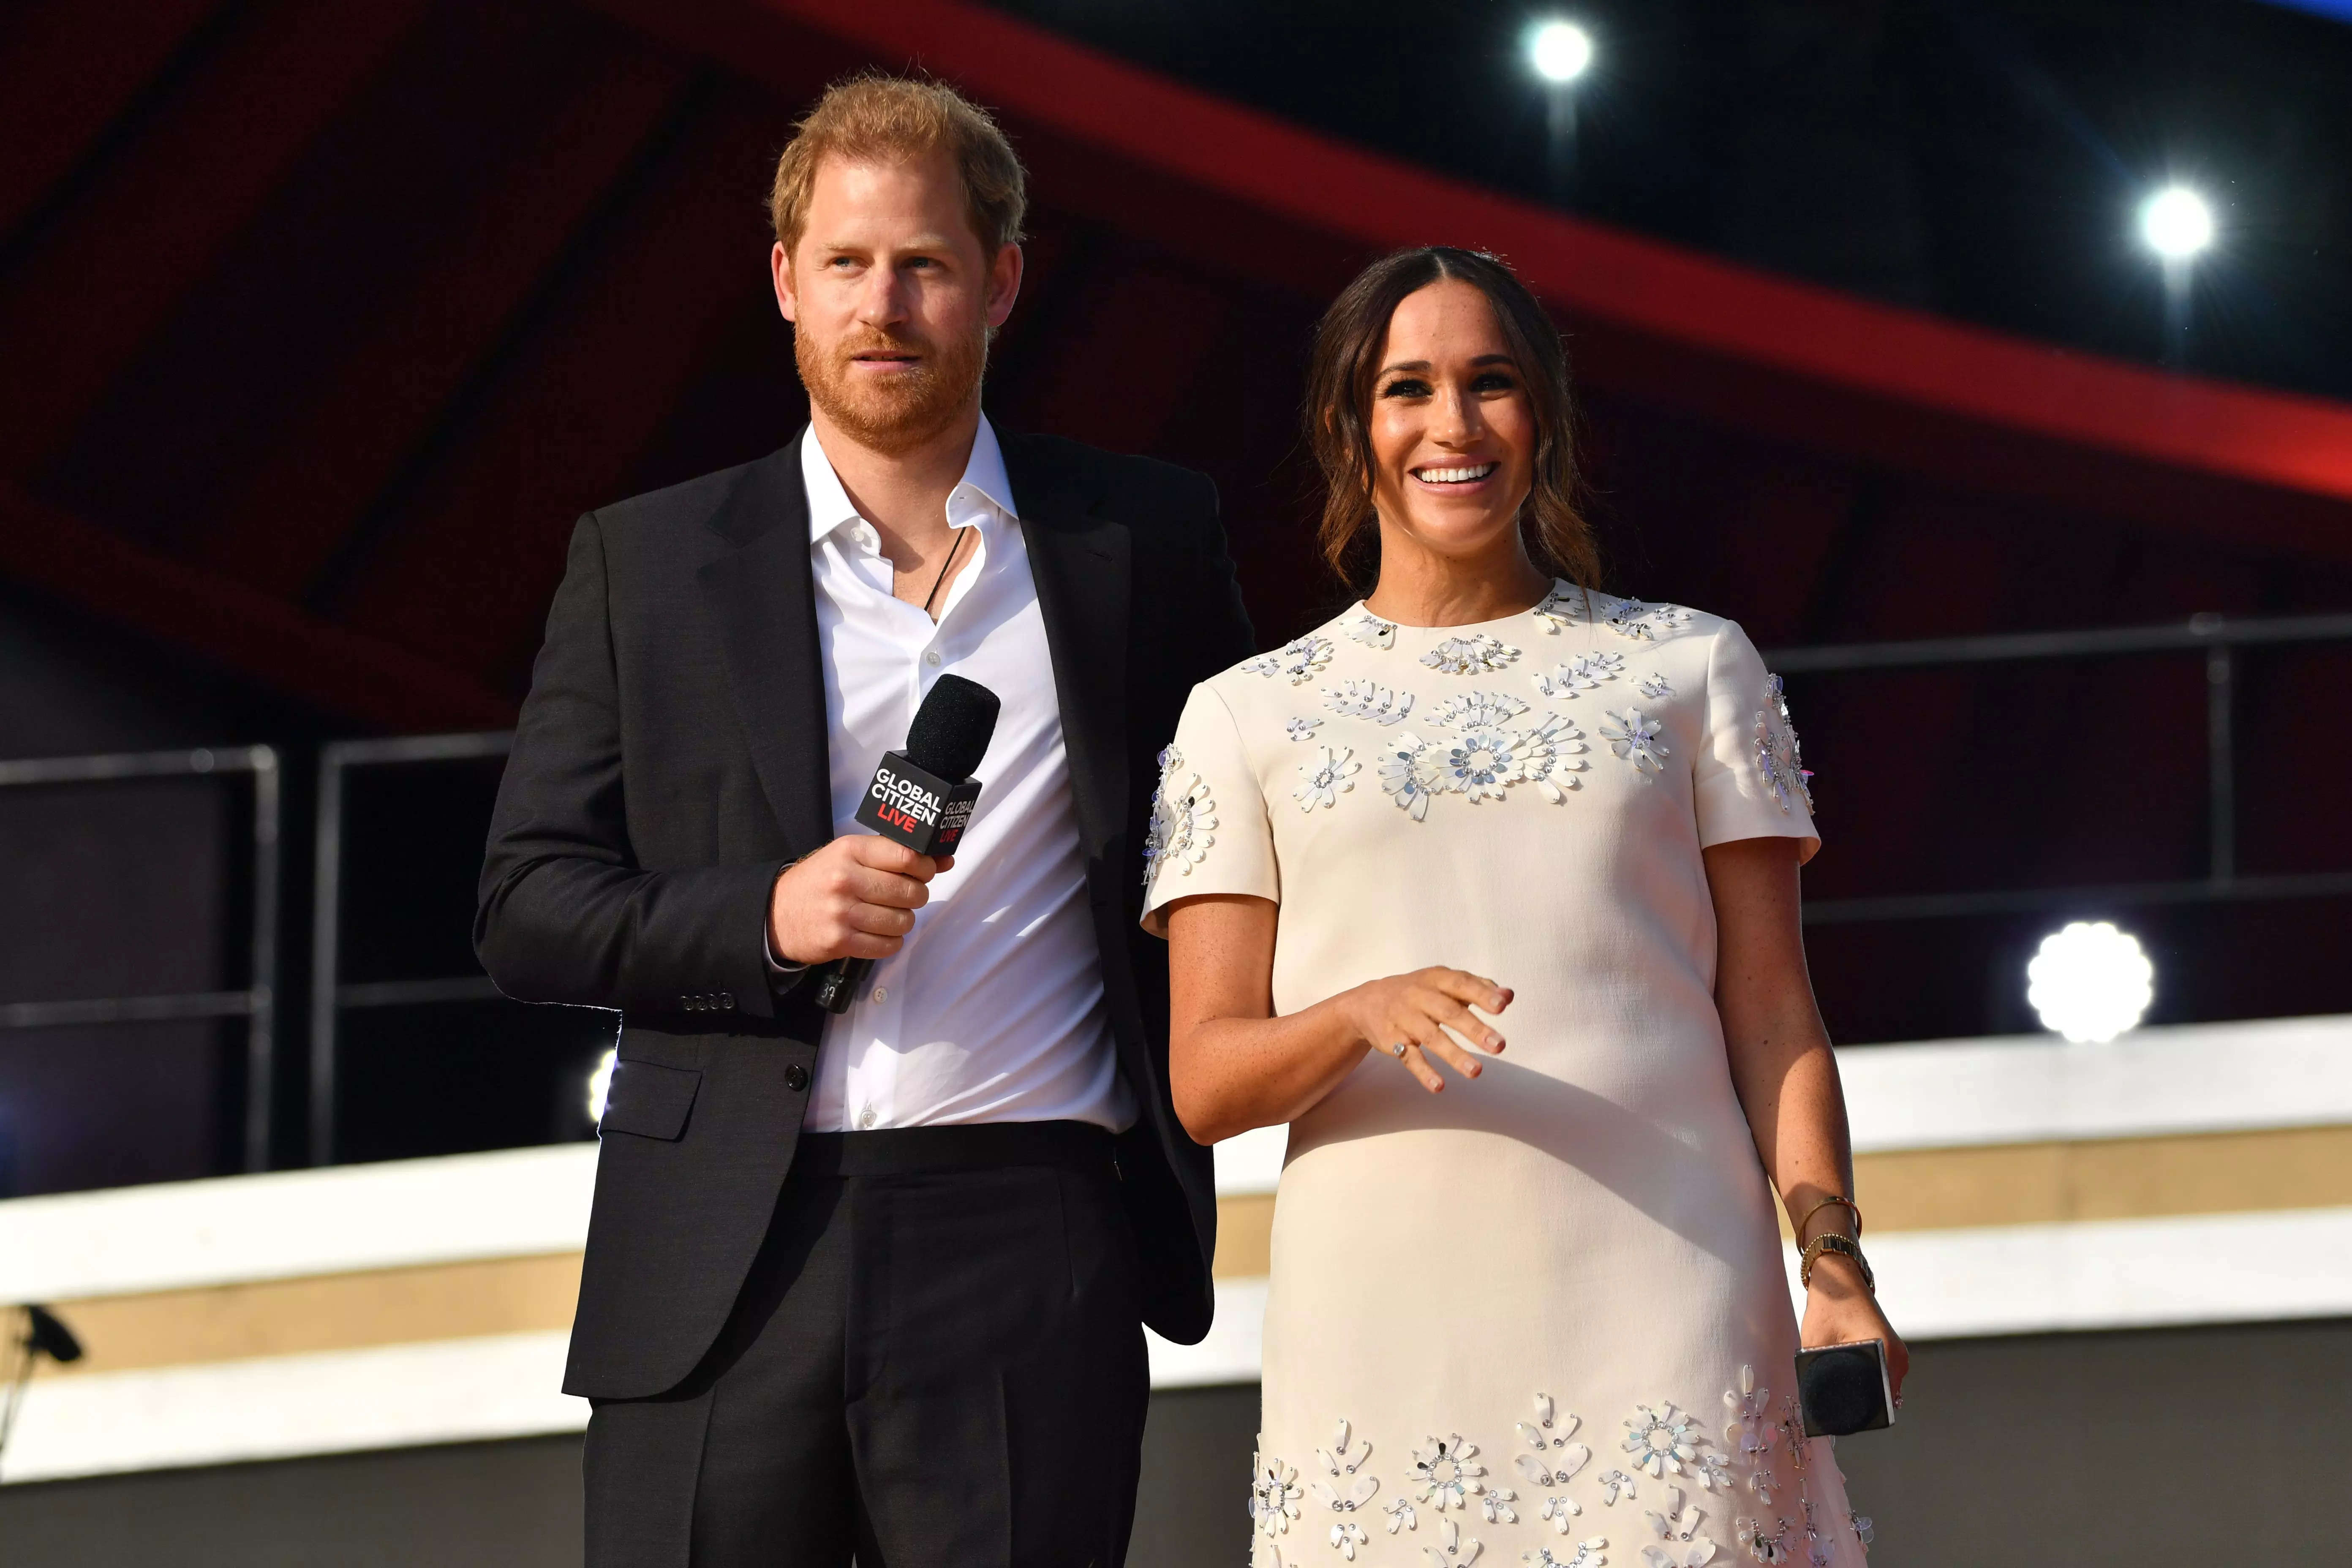 Meghan Markle and Prince Harry honored with public service award at the